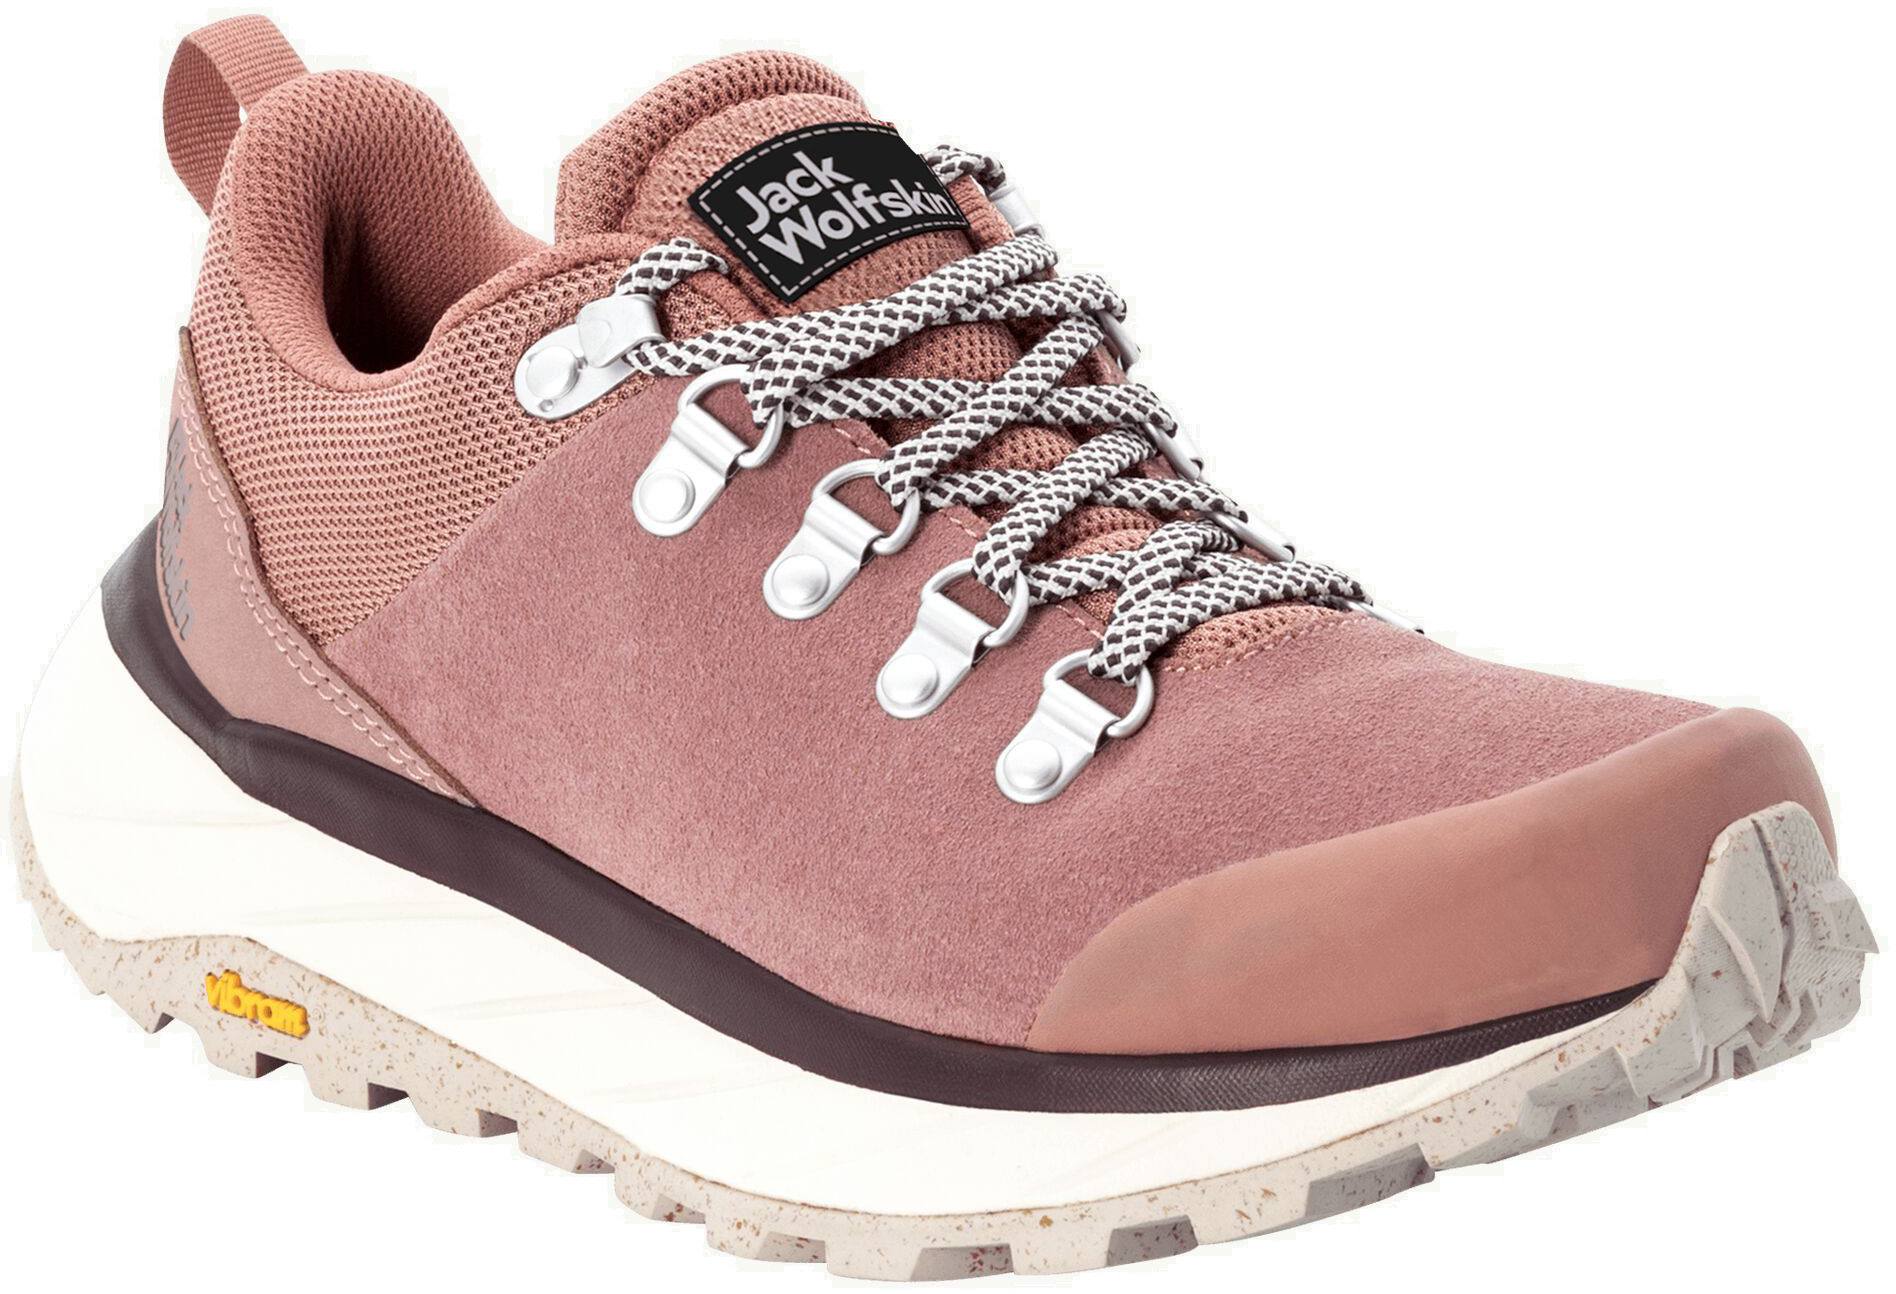 Jack Wolfskin Woodland 2 Texapore Women's Walking Shoes - SS23 - 10% Off |  SportsShoes.com